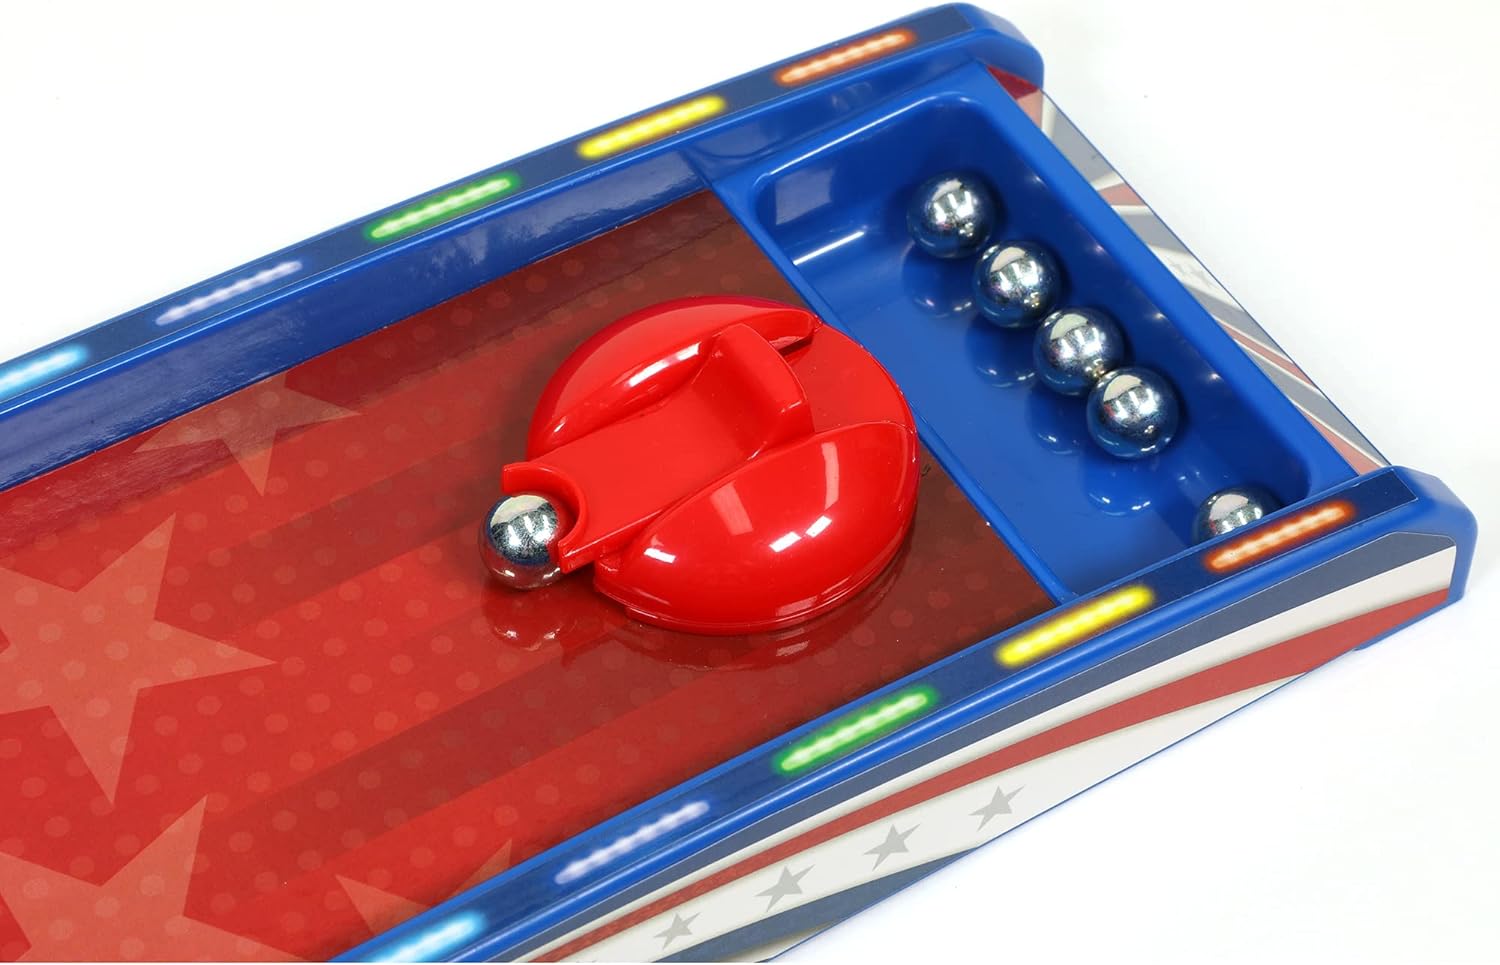 Merchant Ambassador Retro Arcade Electronic: Alley-Ball - Tabletop Game, 3' Track, Scoreboard & Sound Effects, 1-2 Players, Ages 6+